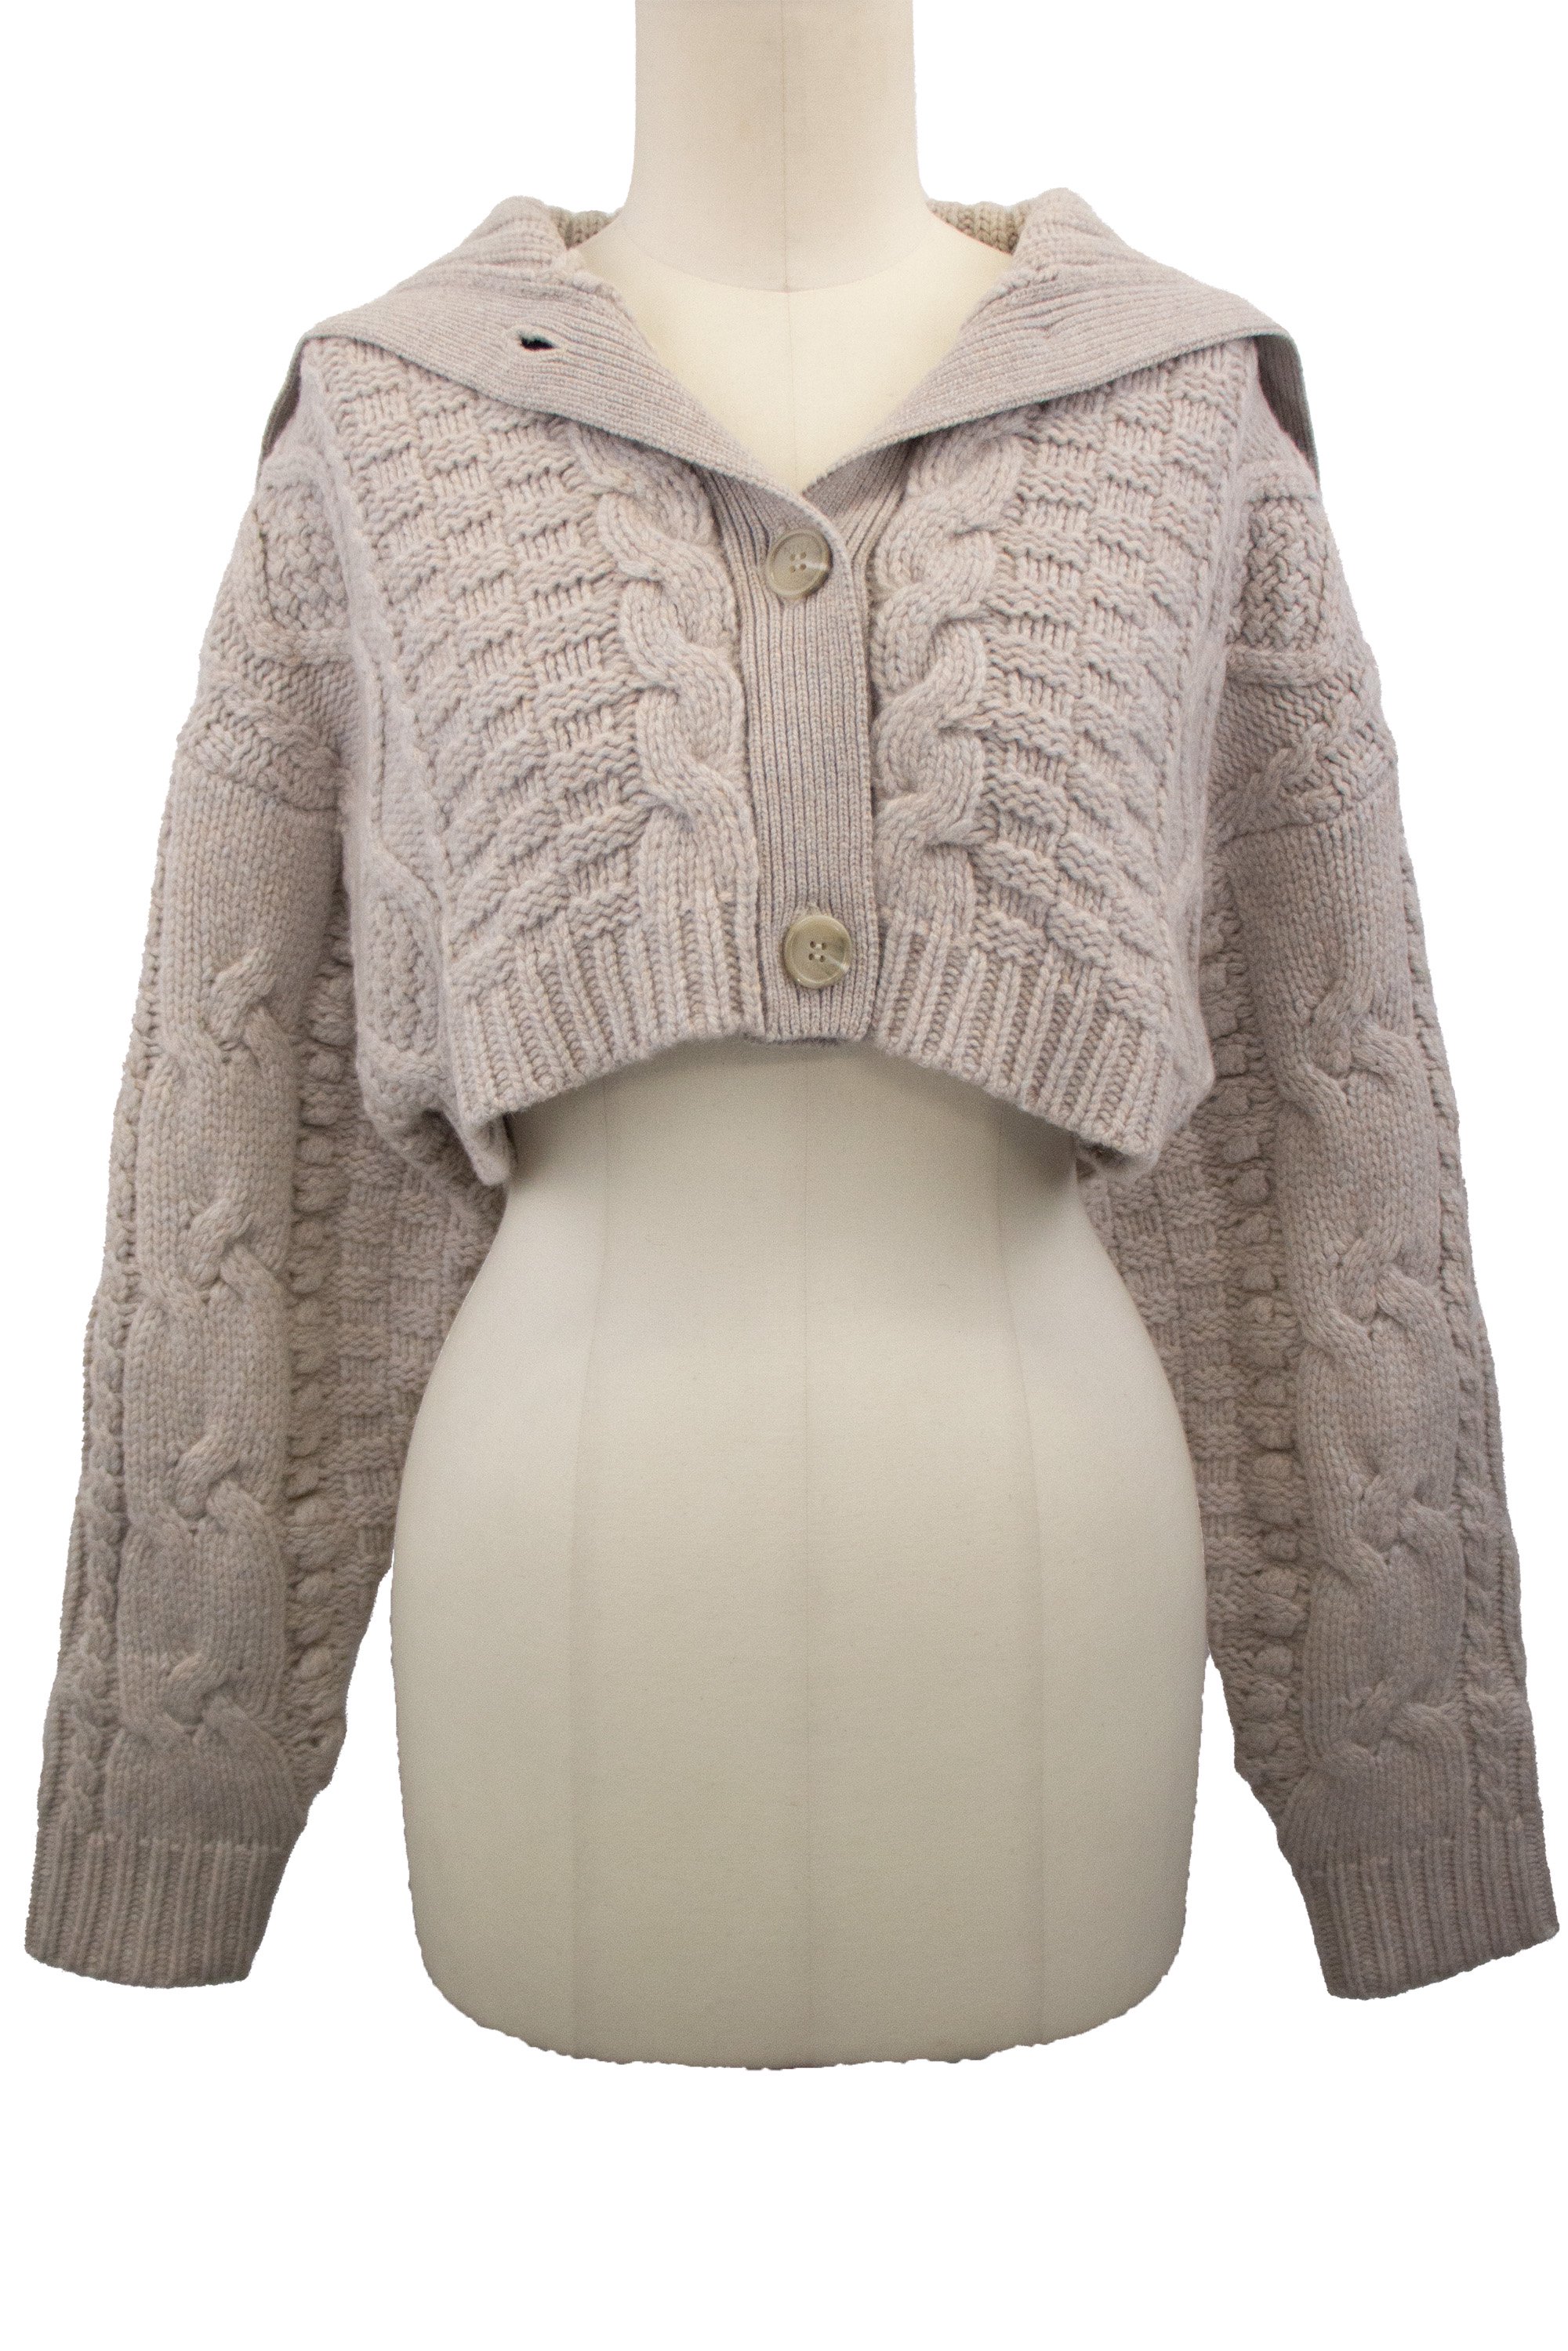 <img class='new_mark_img1' src='https://img.shop-pro.jp/img/new/icons8.gif' style='border:none;display:inline;margin:0px;padding:0px;width:auto;' />NINARICCI turtle neck cable cardigan